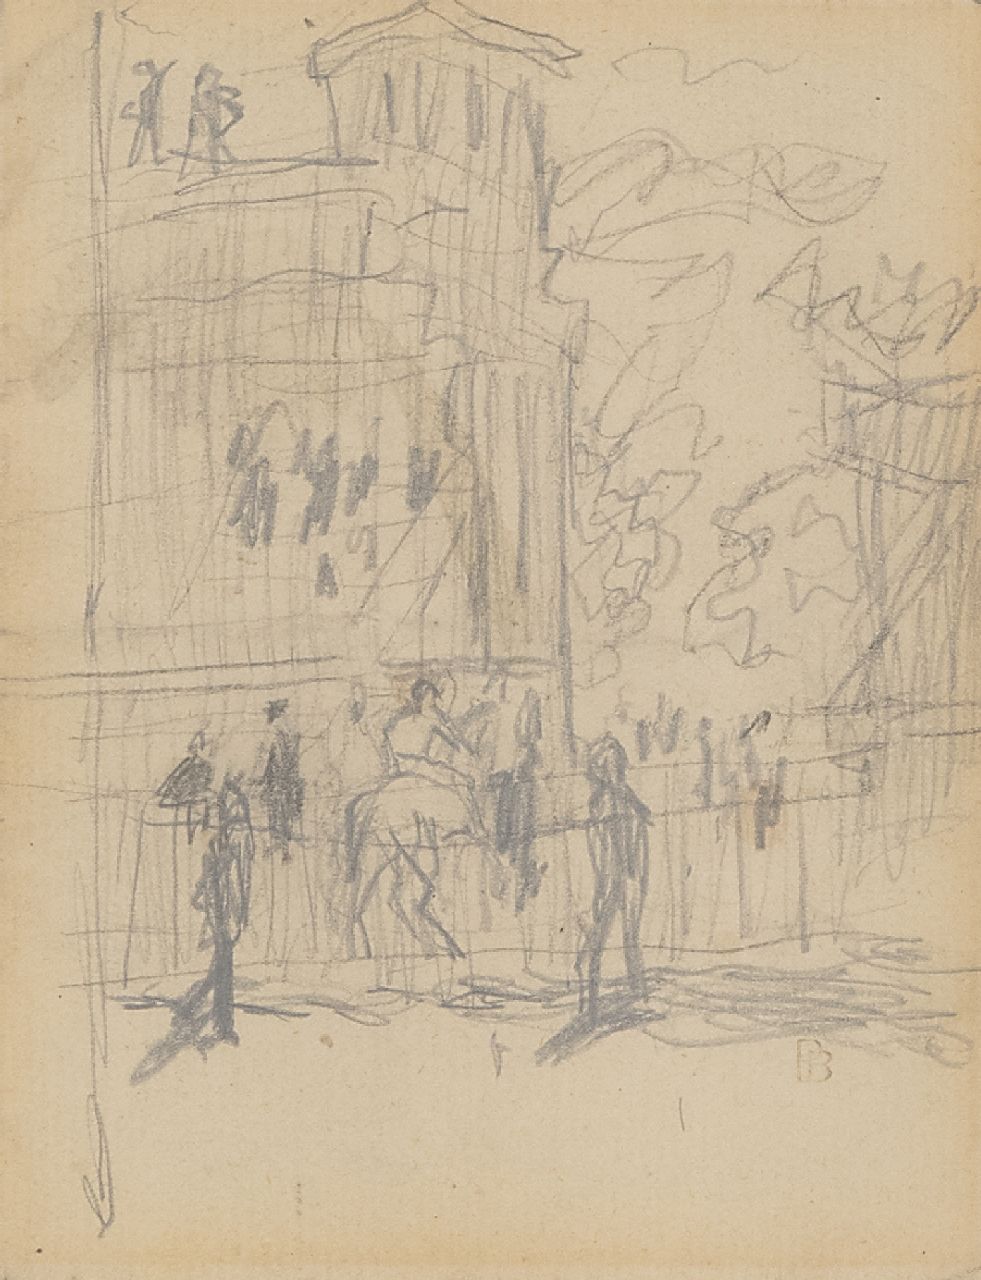 Pierre Bonnard | At the races, pencil on paper, 11.0 x 8.5 cm, signed l.r. with stamp